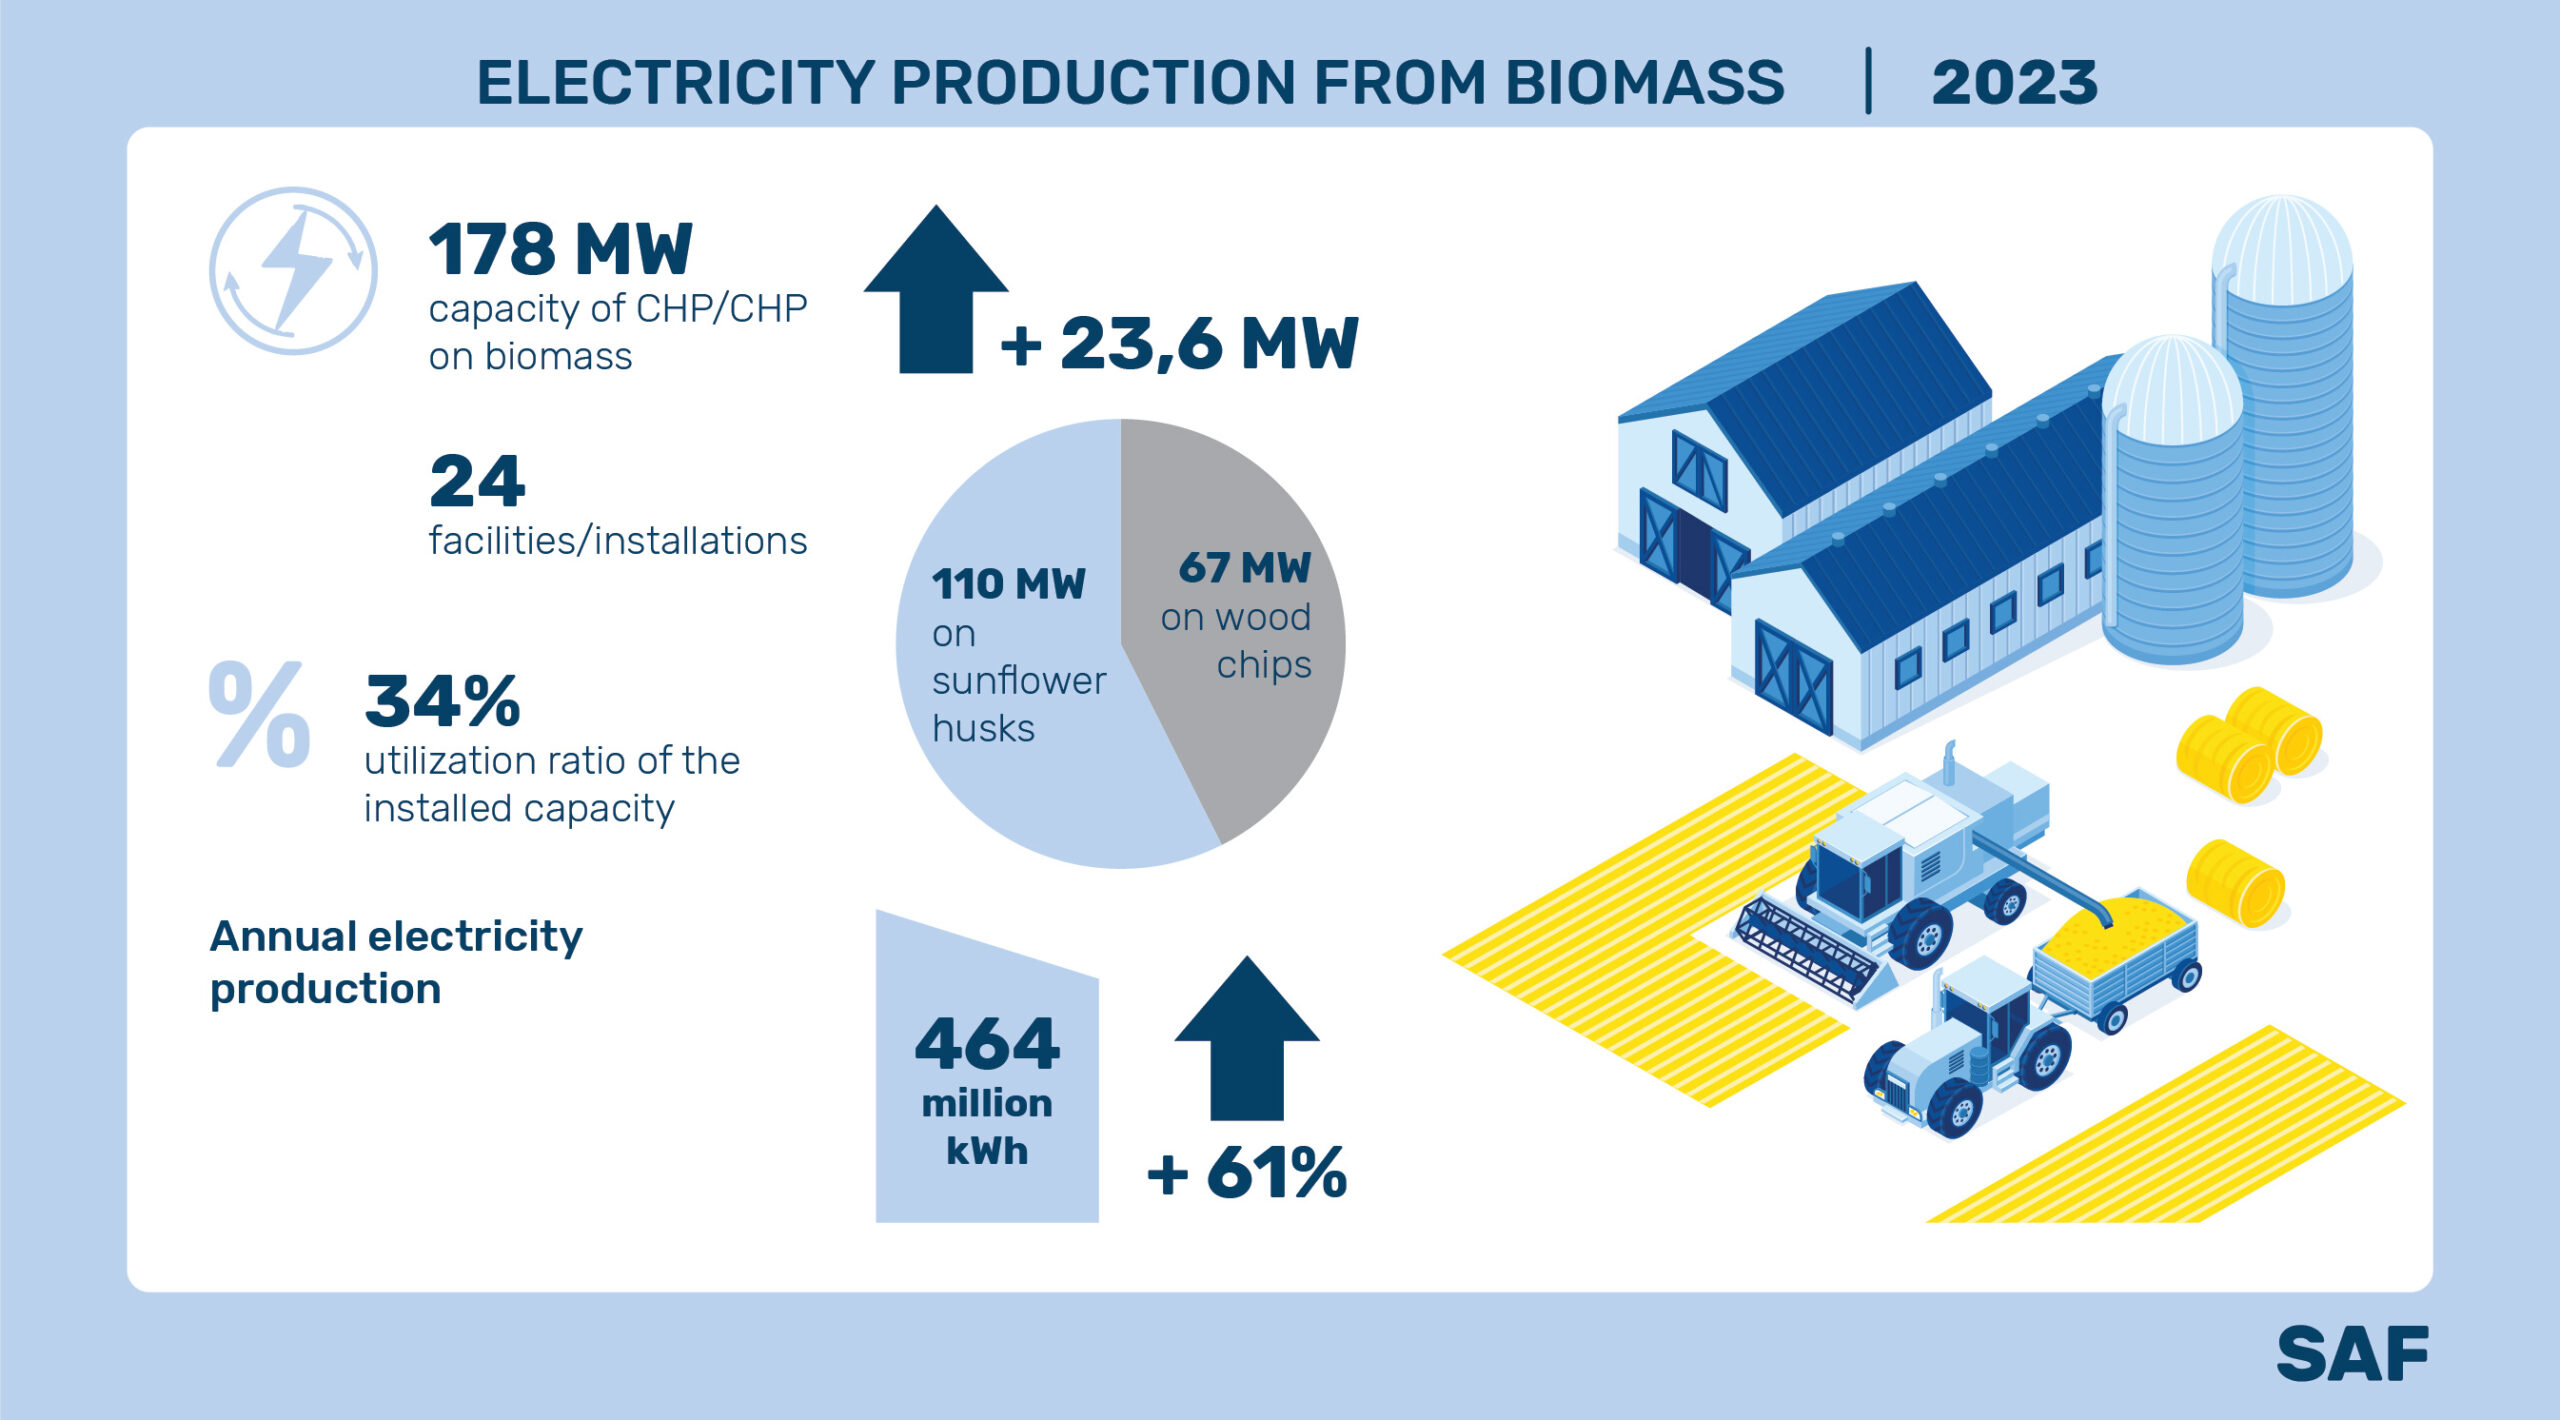 Electricity production from biomass